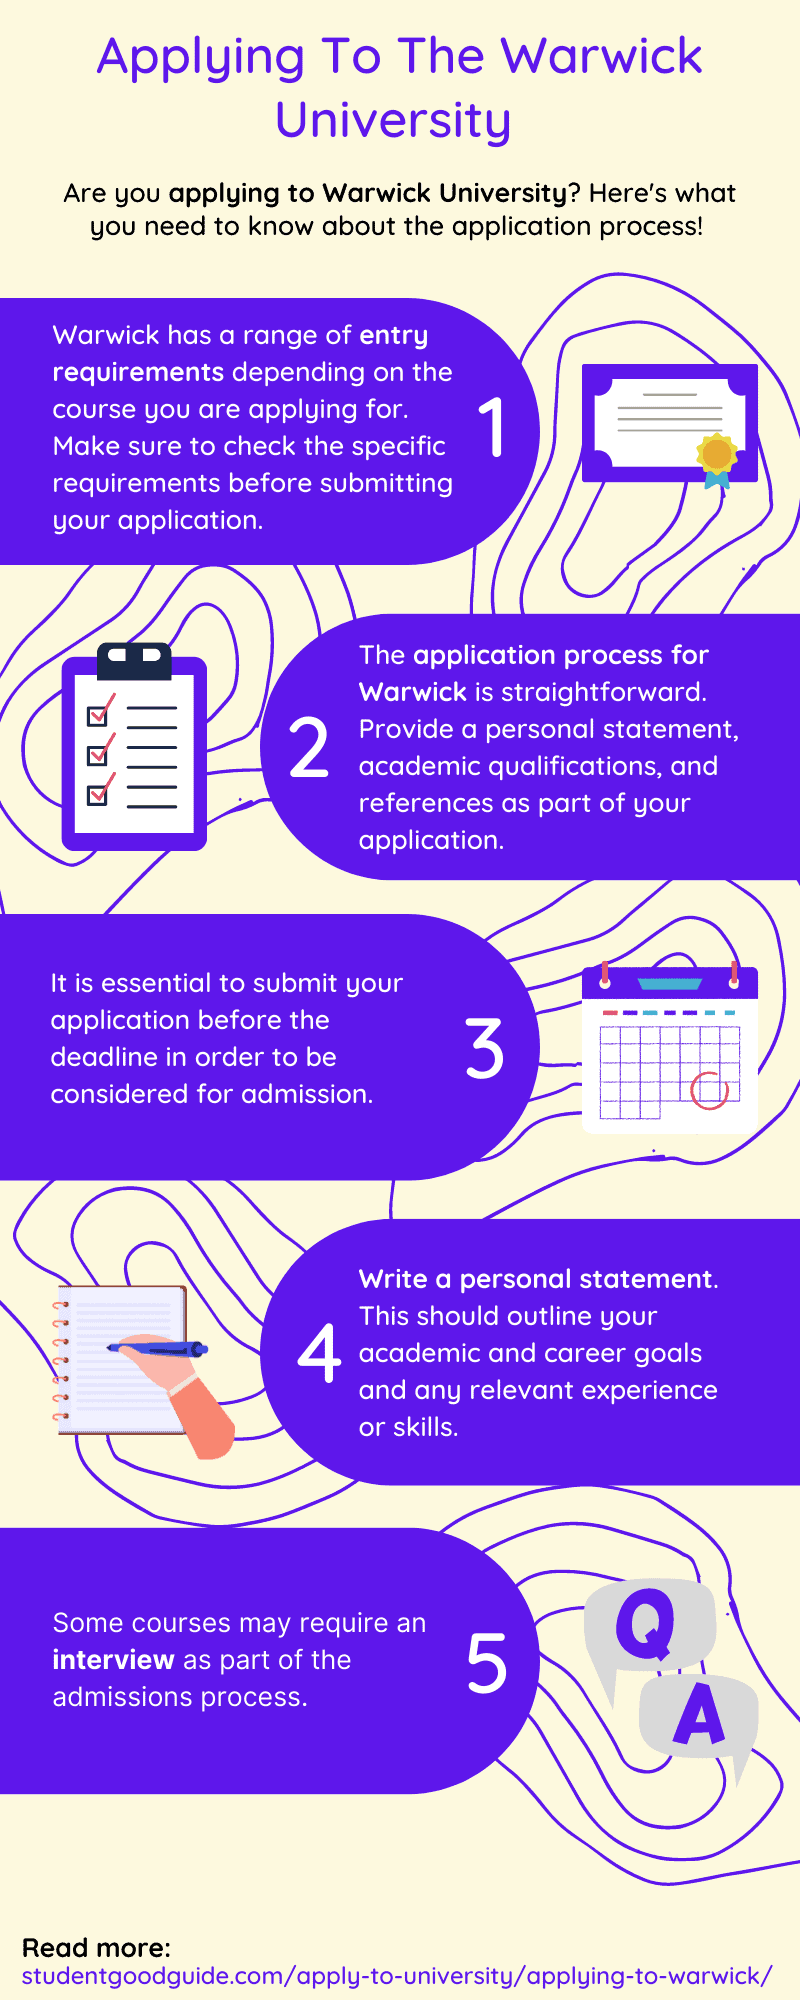 Detailed infographic on applying to the Warwick University